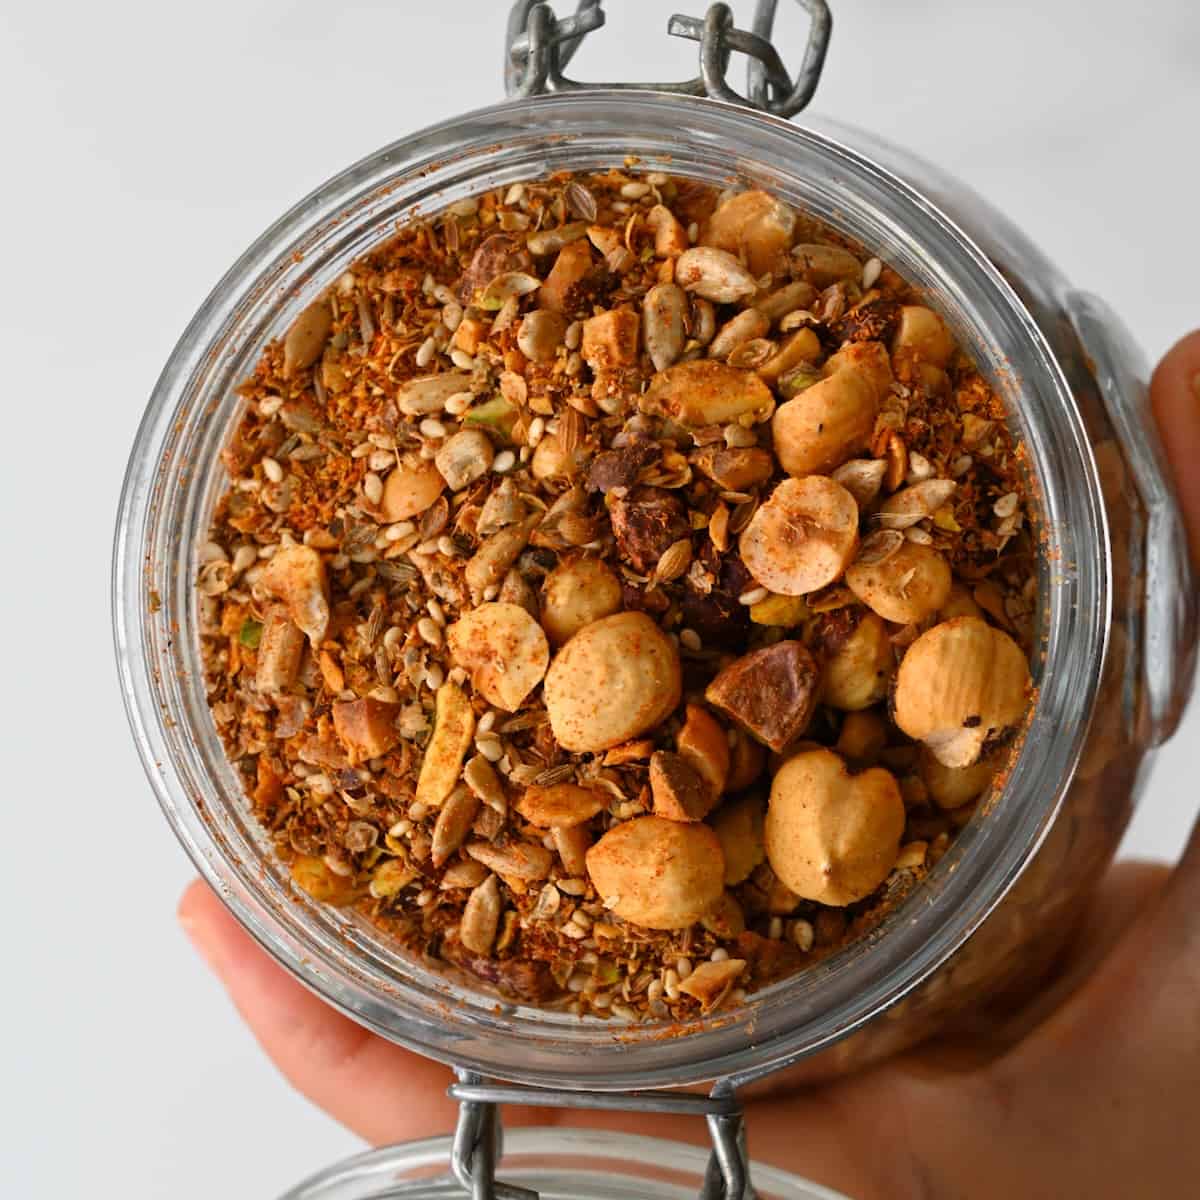 A jar with homemade dukkah spice and nut mix